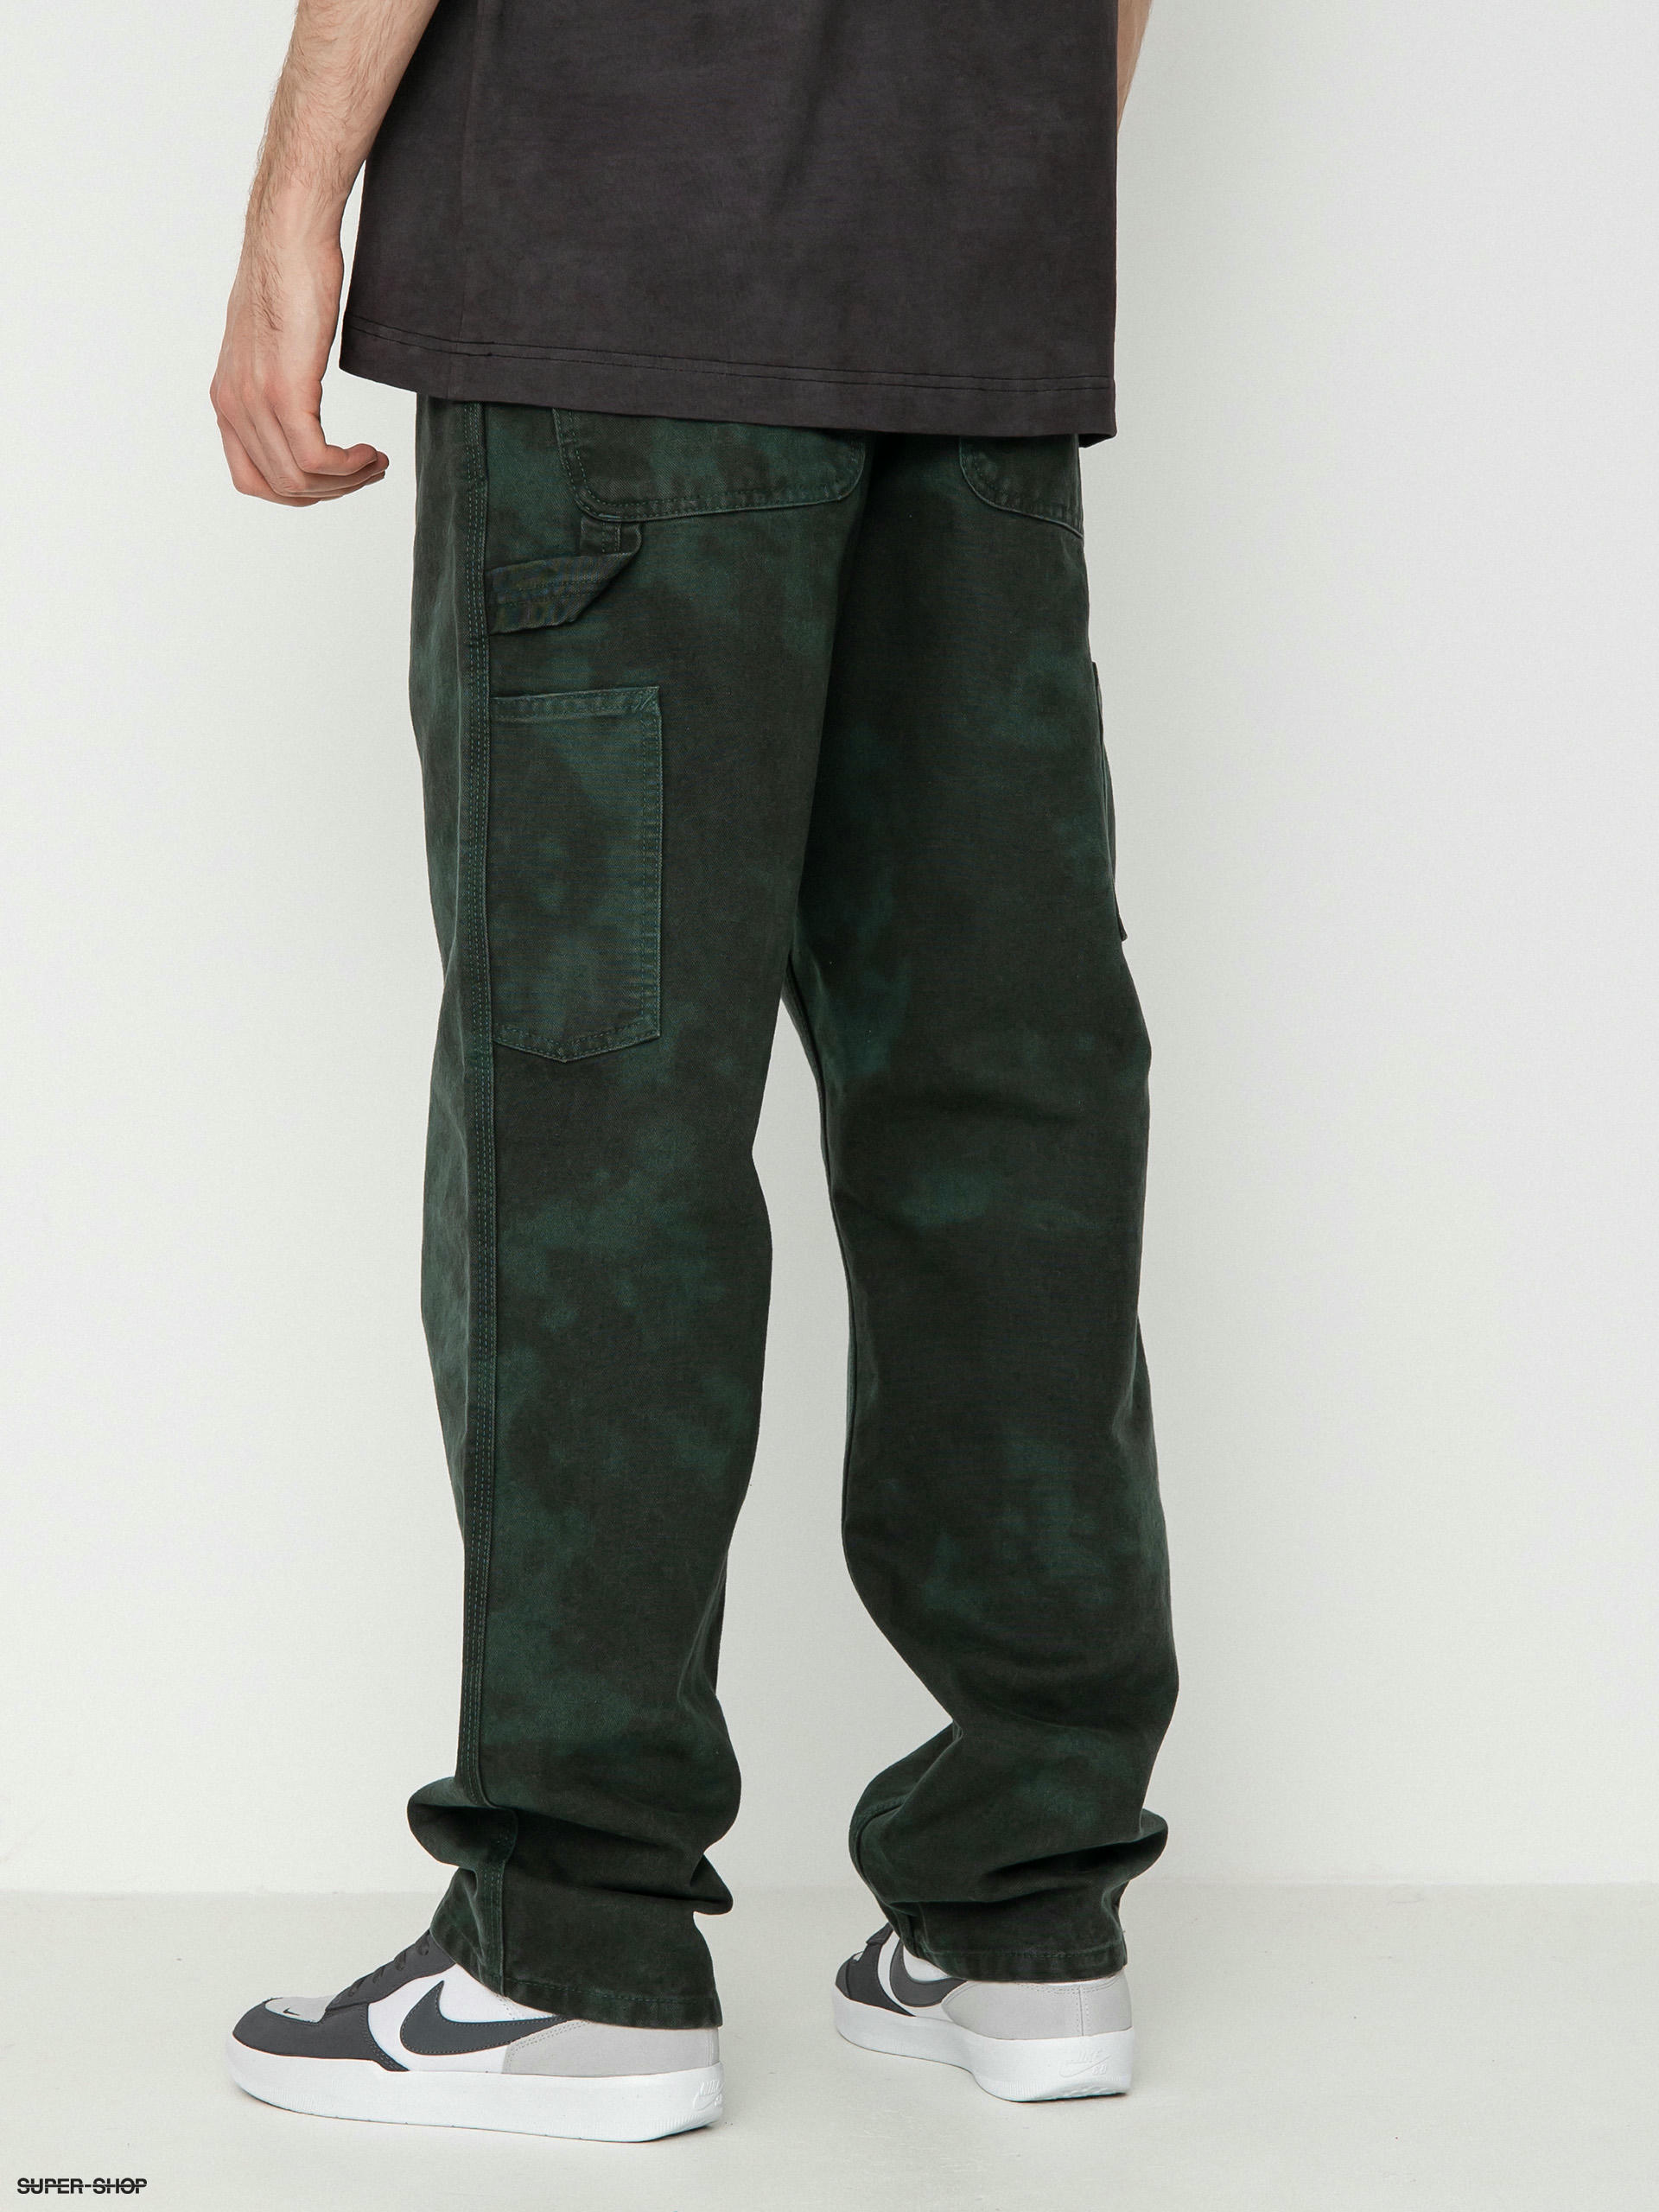 Poetic Collective Sculptor OTD Pants (olive ripstop)